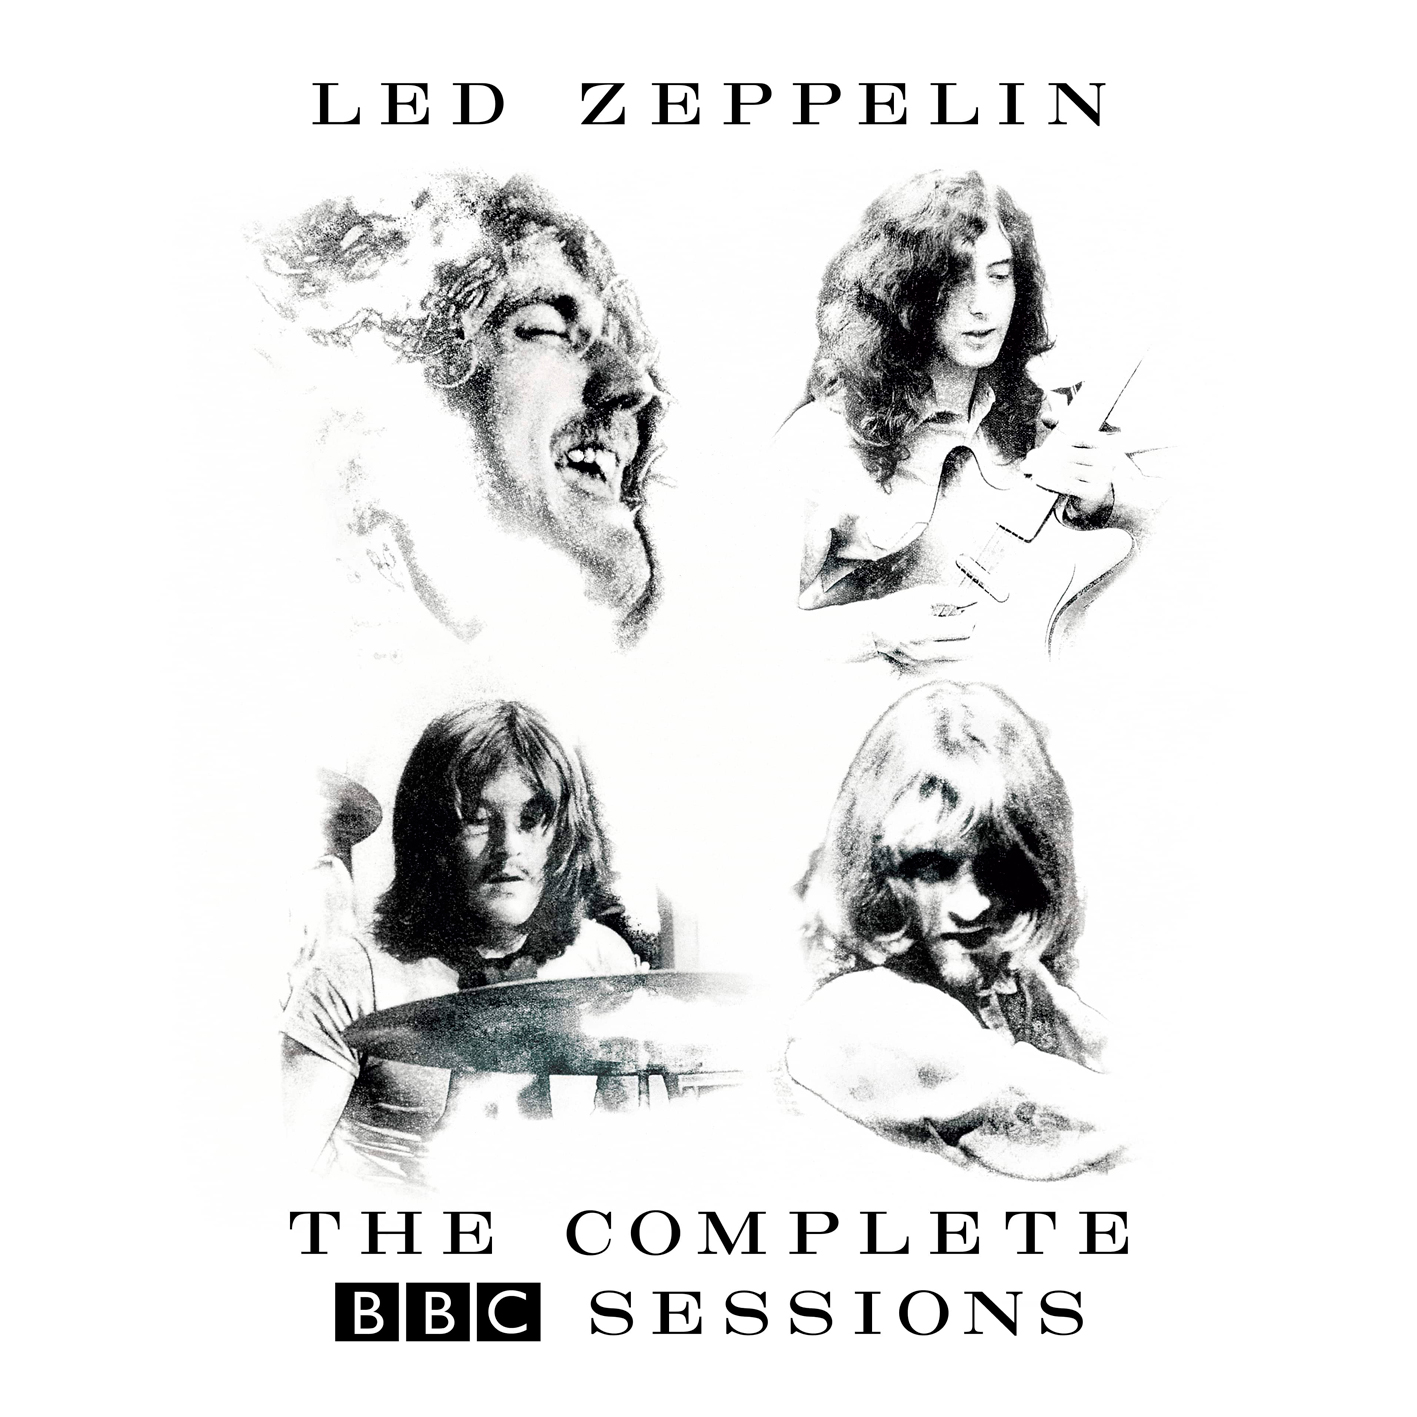 Led Zeppelin - The Complete BBC Sessions (2016) [HDTracks FLAC 24bit/96kHz]